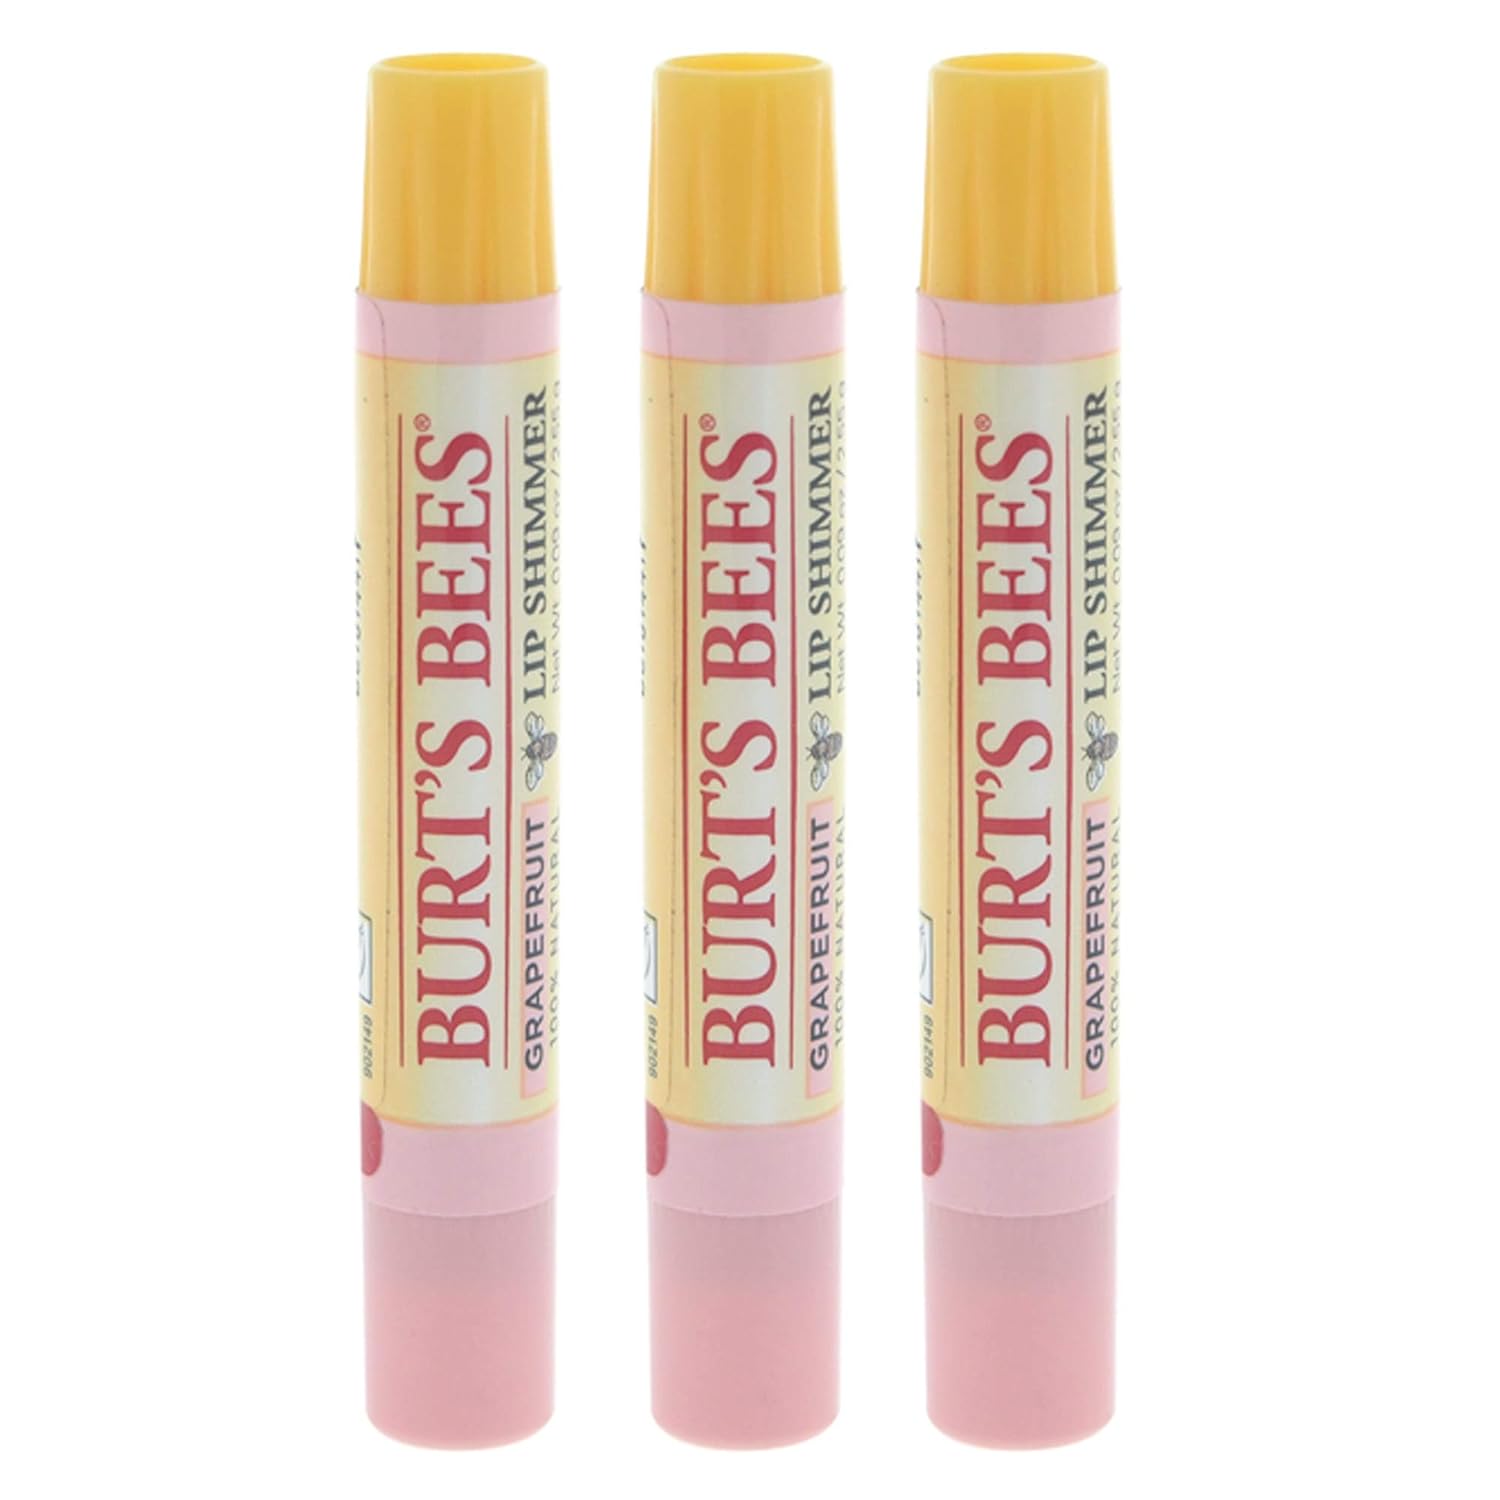 Burts Bees Kissable Color Warm Collection Unisex Lip Shimmer Peony Rhubarb  Fig 3 oz